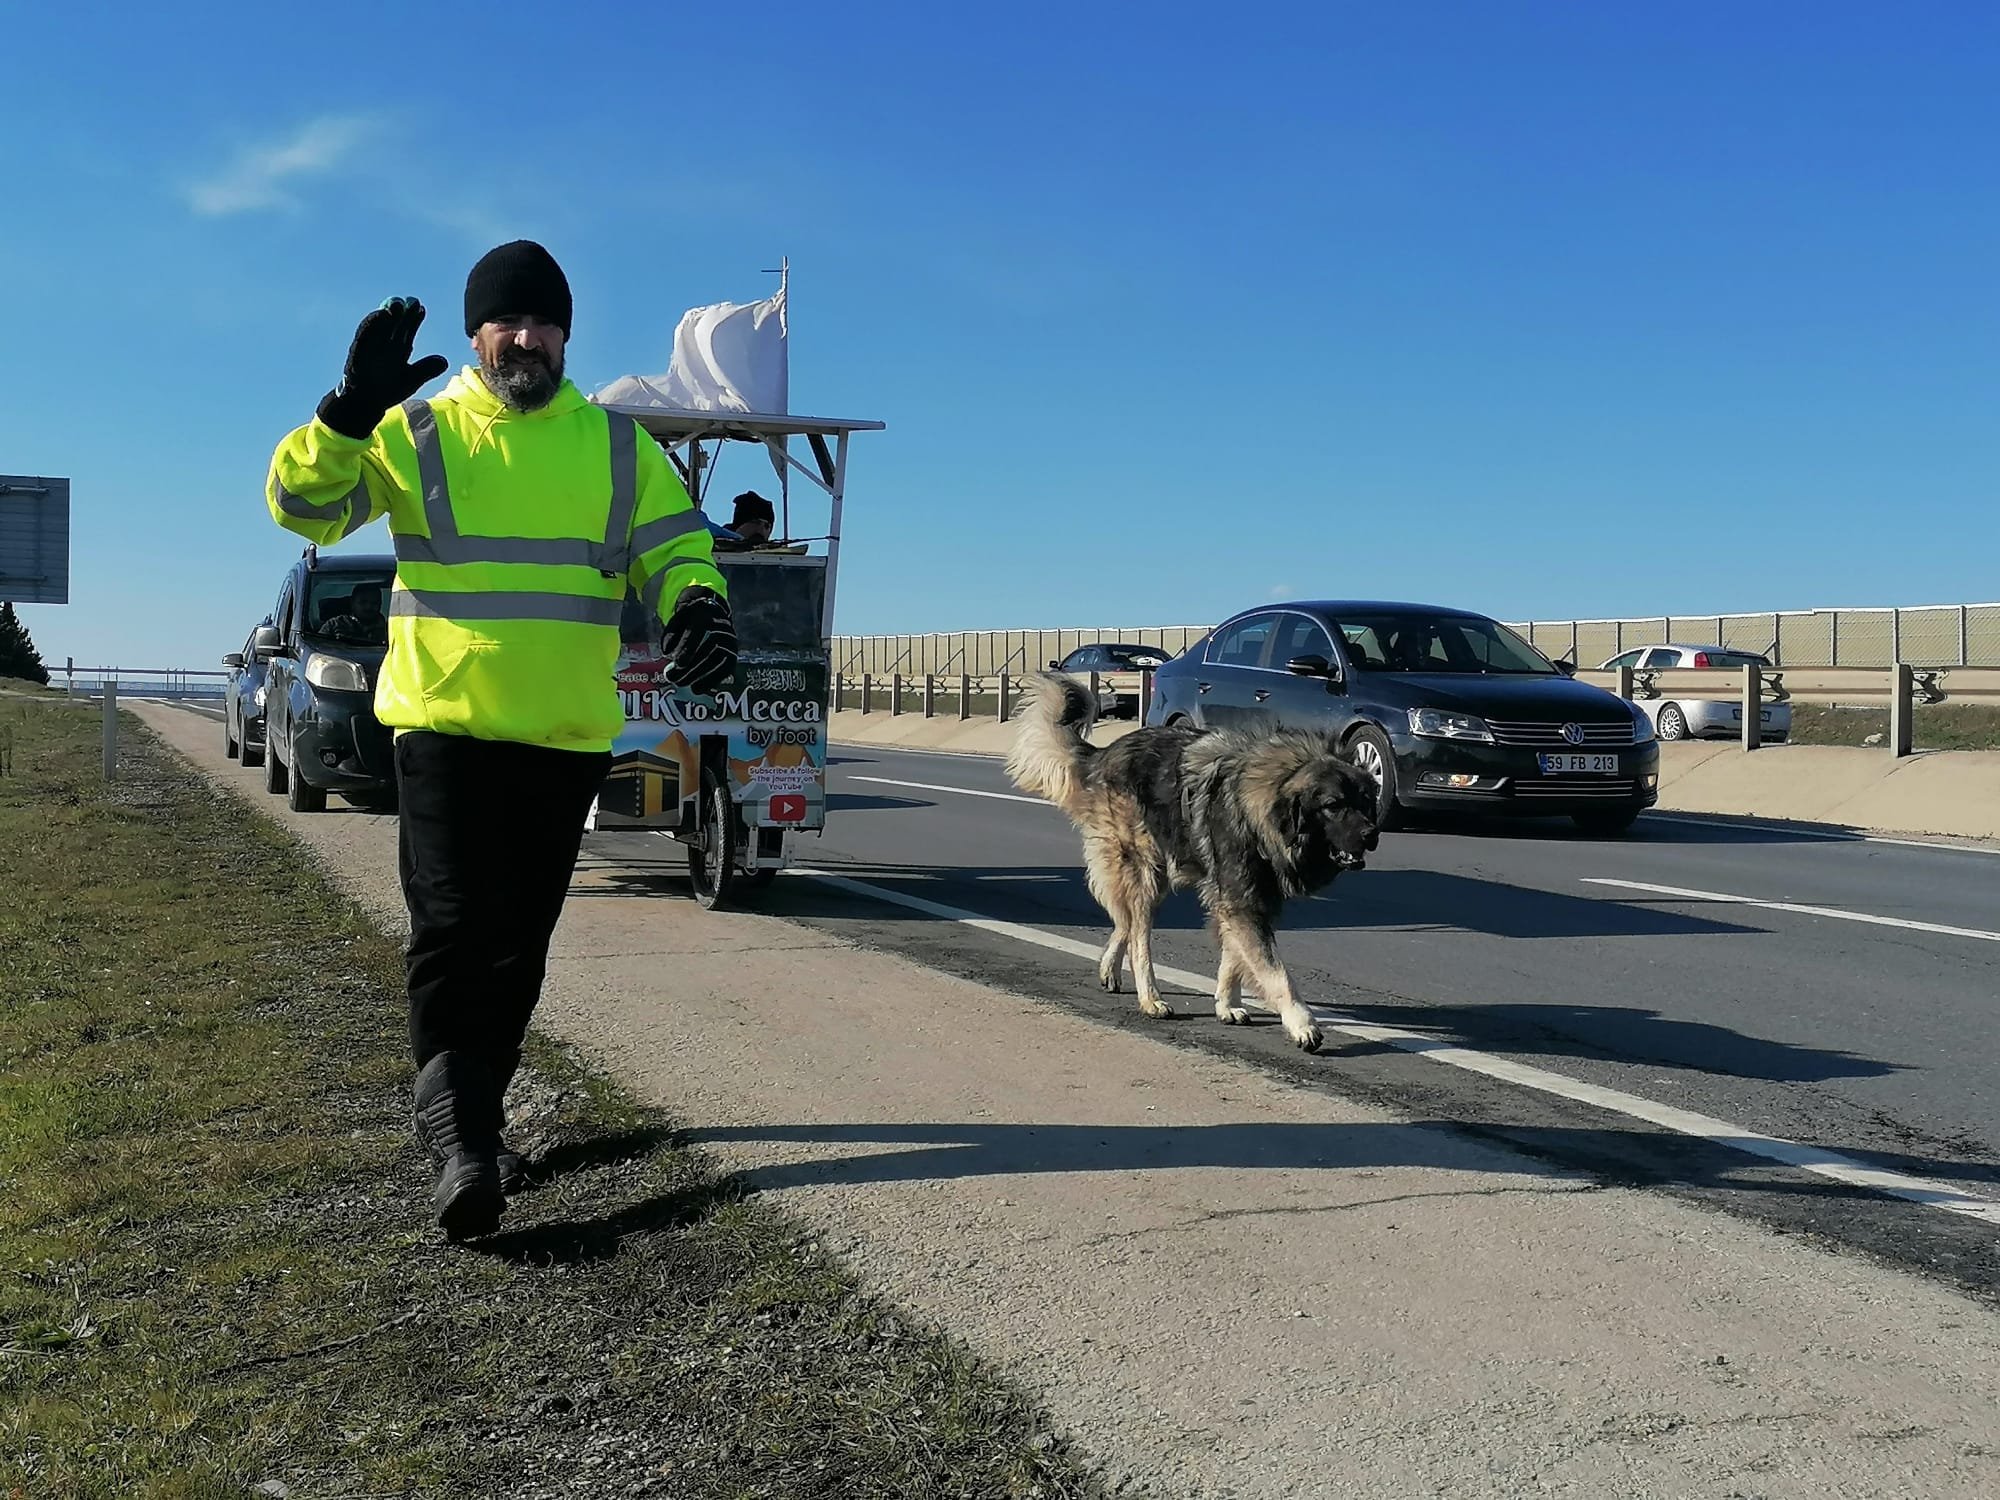 Adam Muhammed, who is walking all the way from England to Mecca, is seen with his cart and dog in Silivri, Istanbul, western Turkey, Jan. 23, 2022 (DHA Photo)